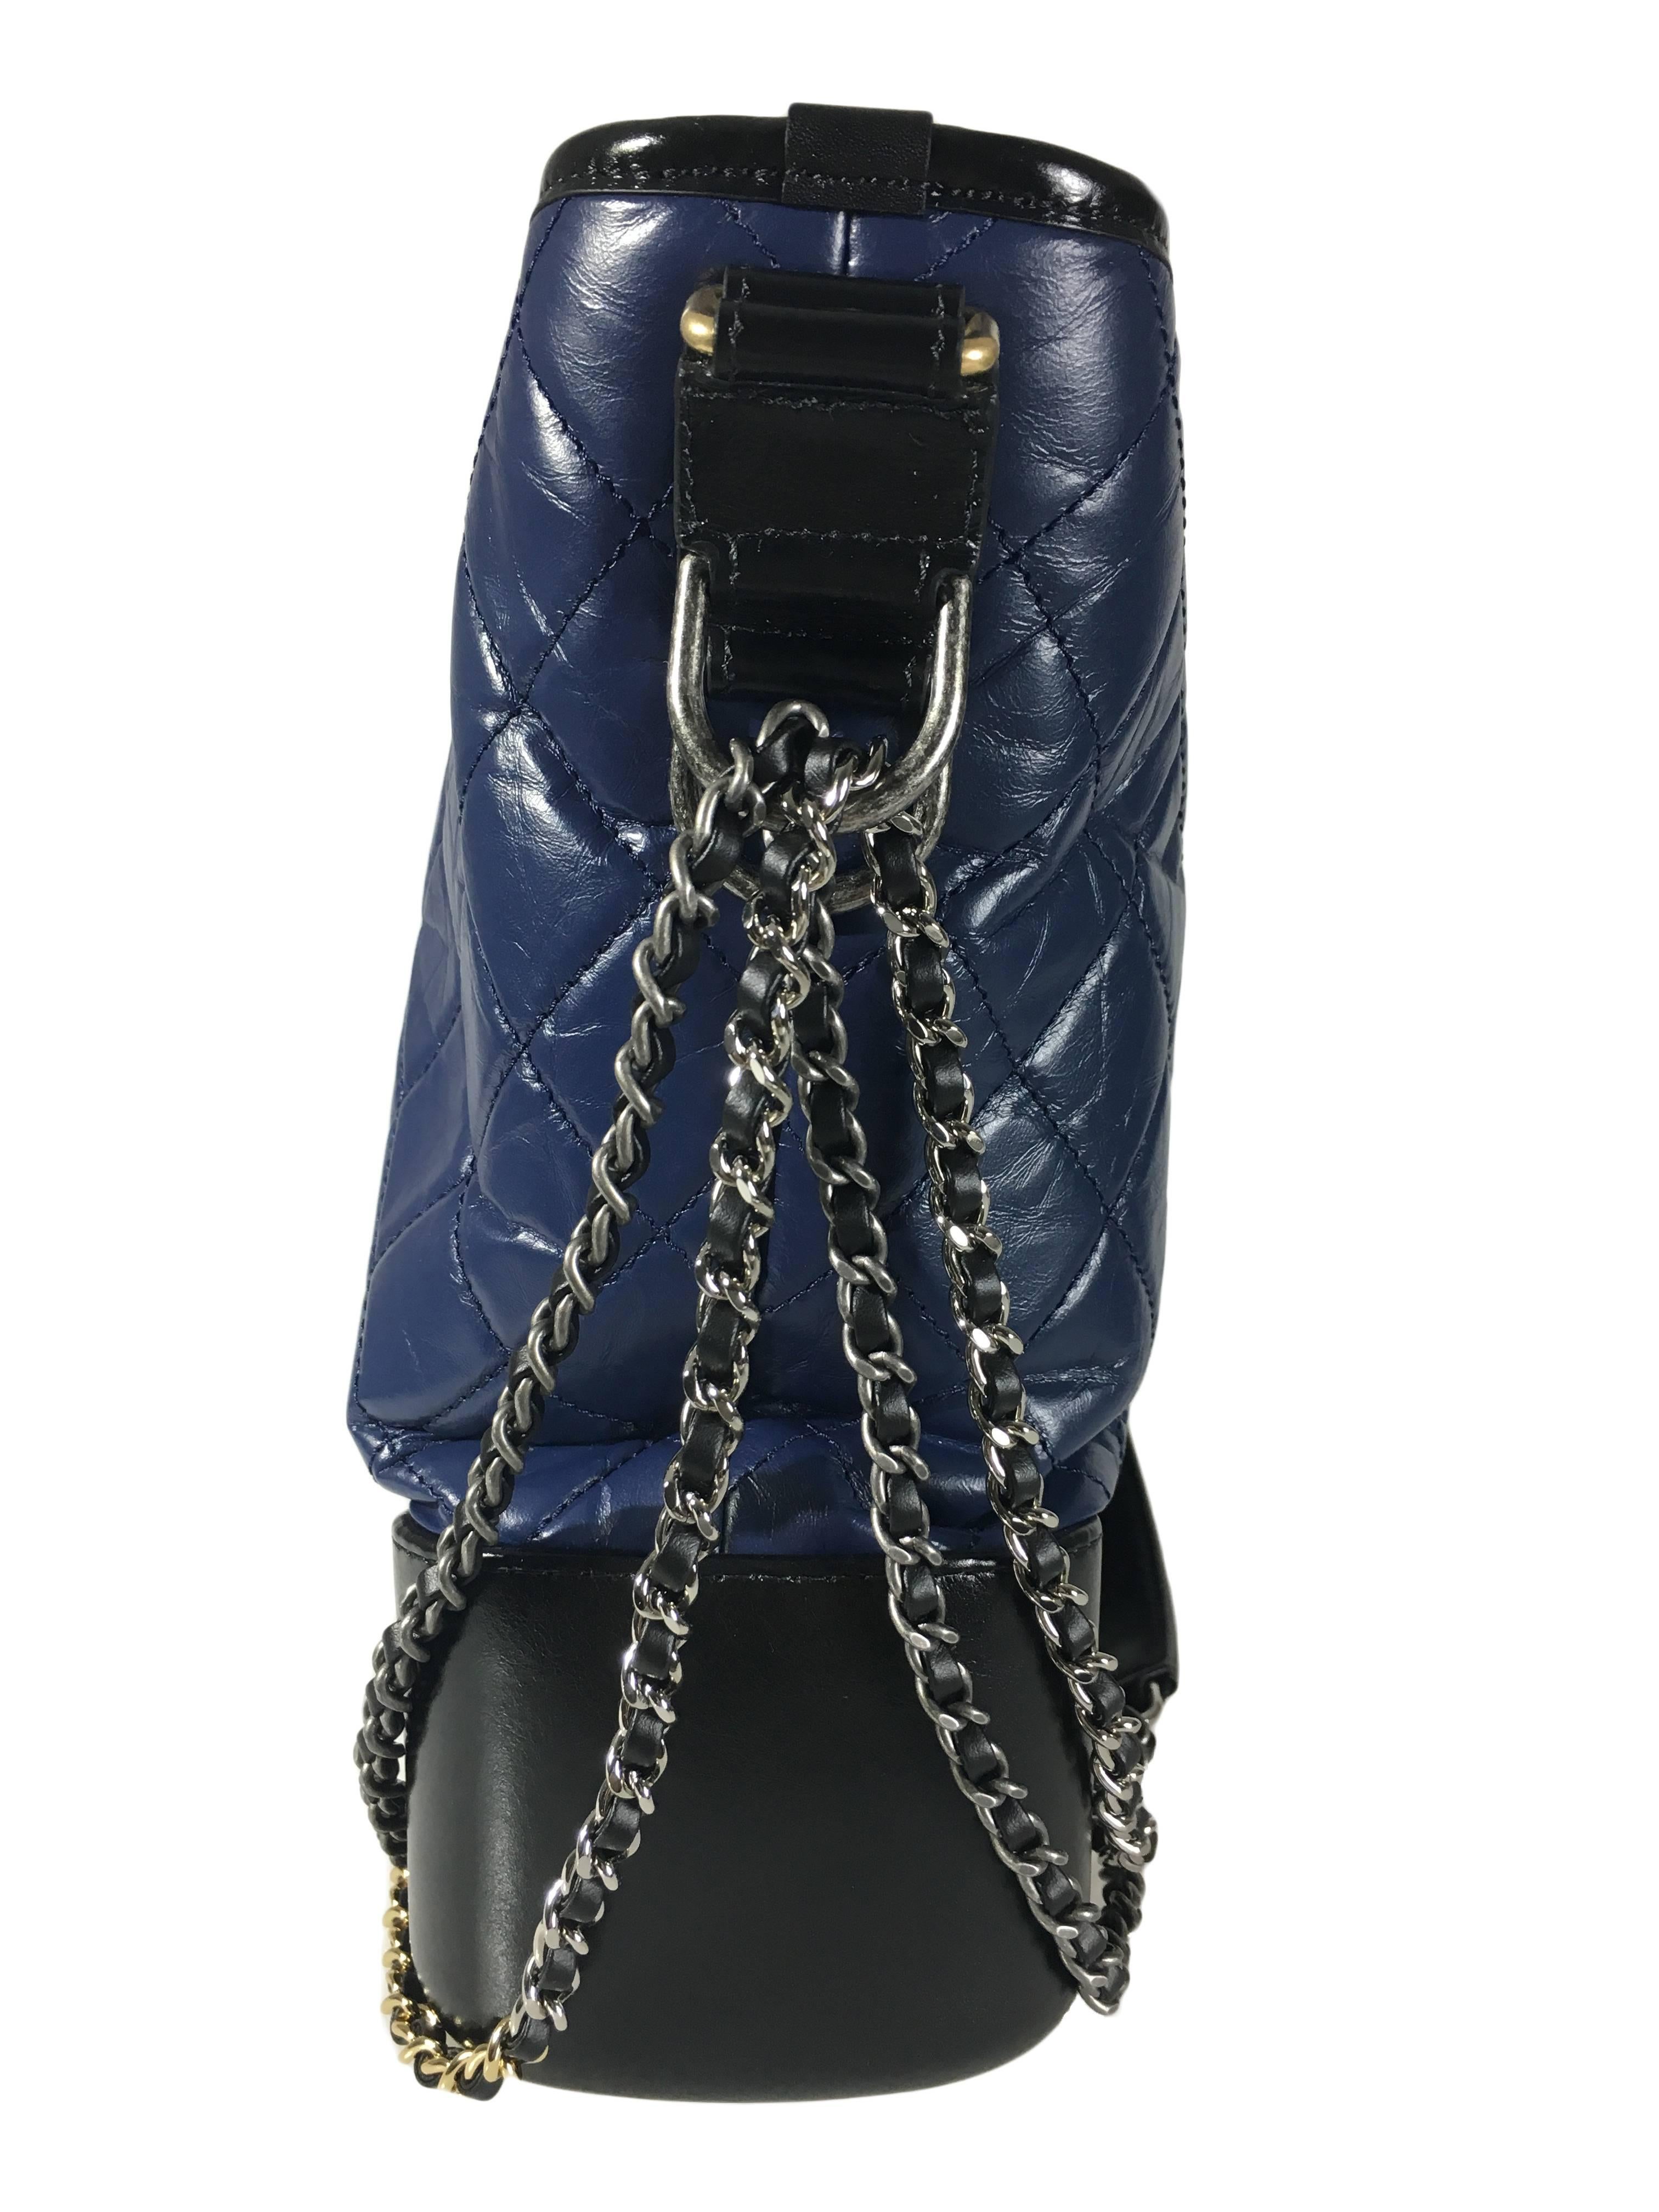 Chanel Black/Navy Gabrielle Large Hobo Bag New In New Condition For Sale In Hong Kong, Hong Kong